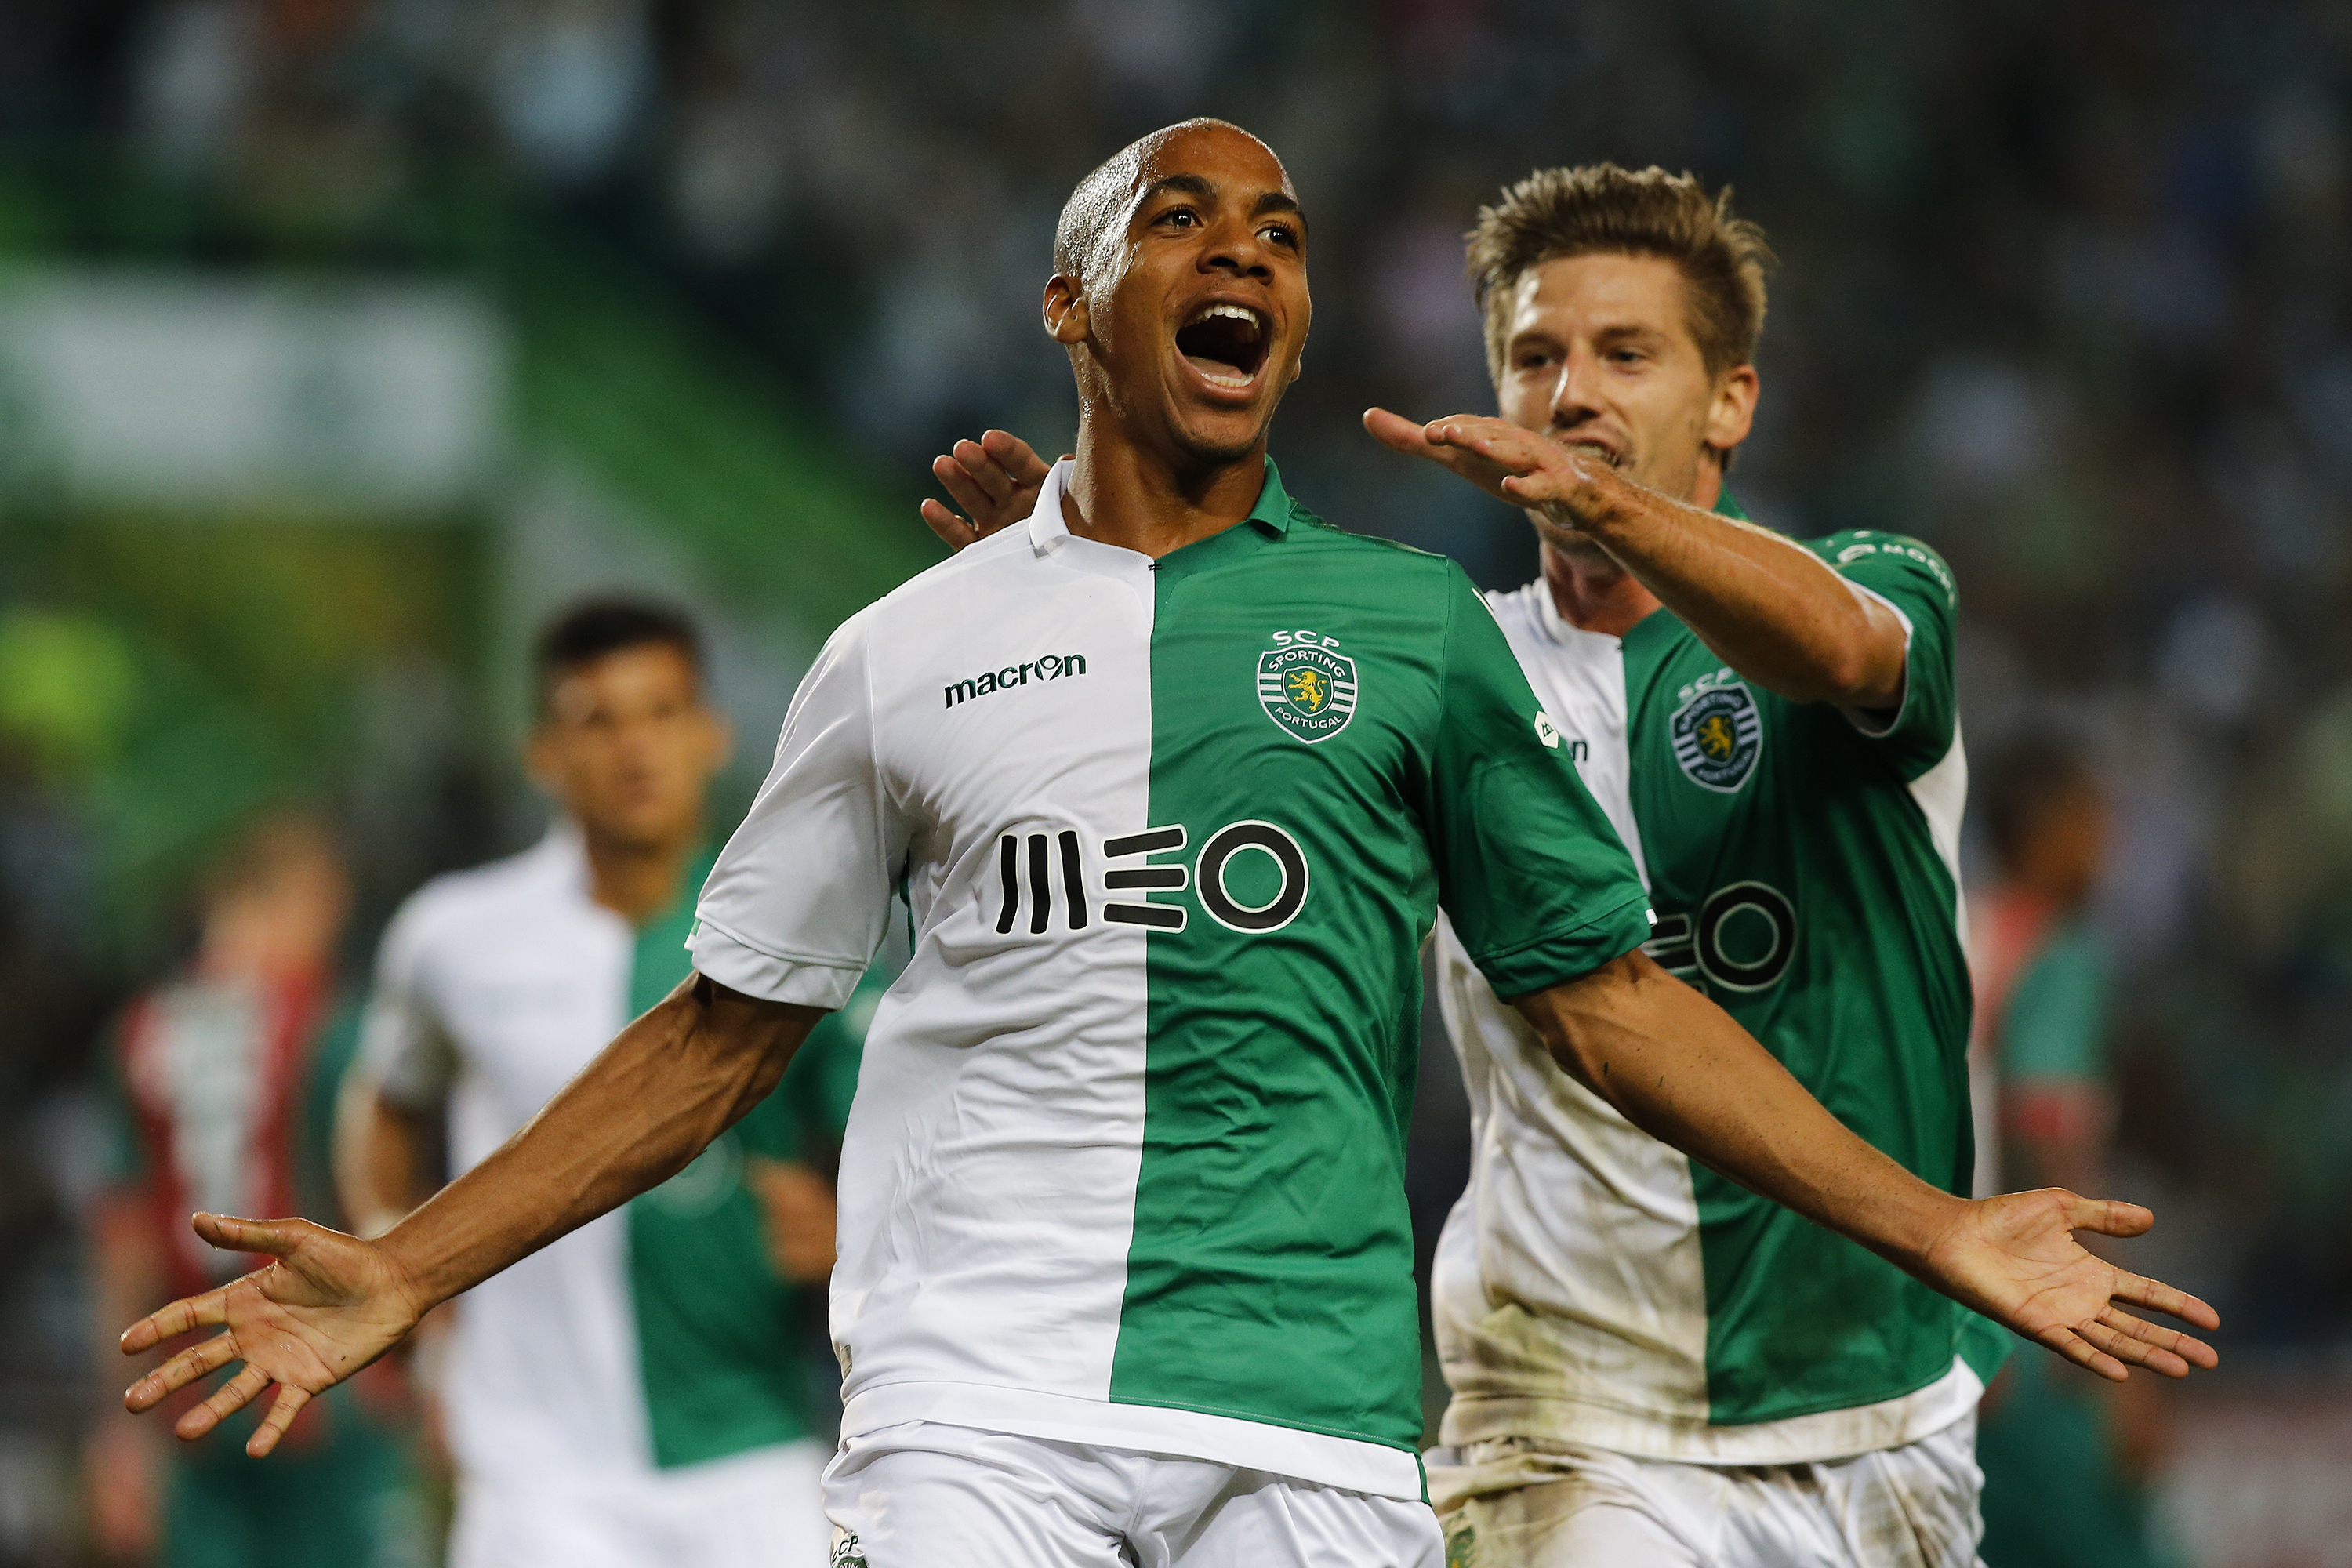 Joao Mario celebrates a goal for Sporting CP against Maritimo in October 2014.